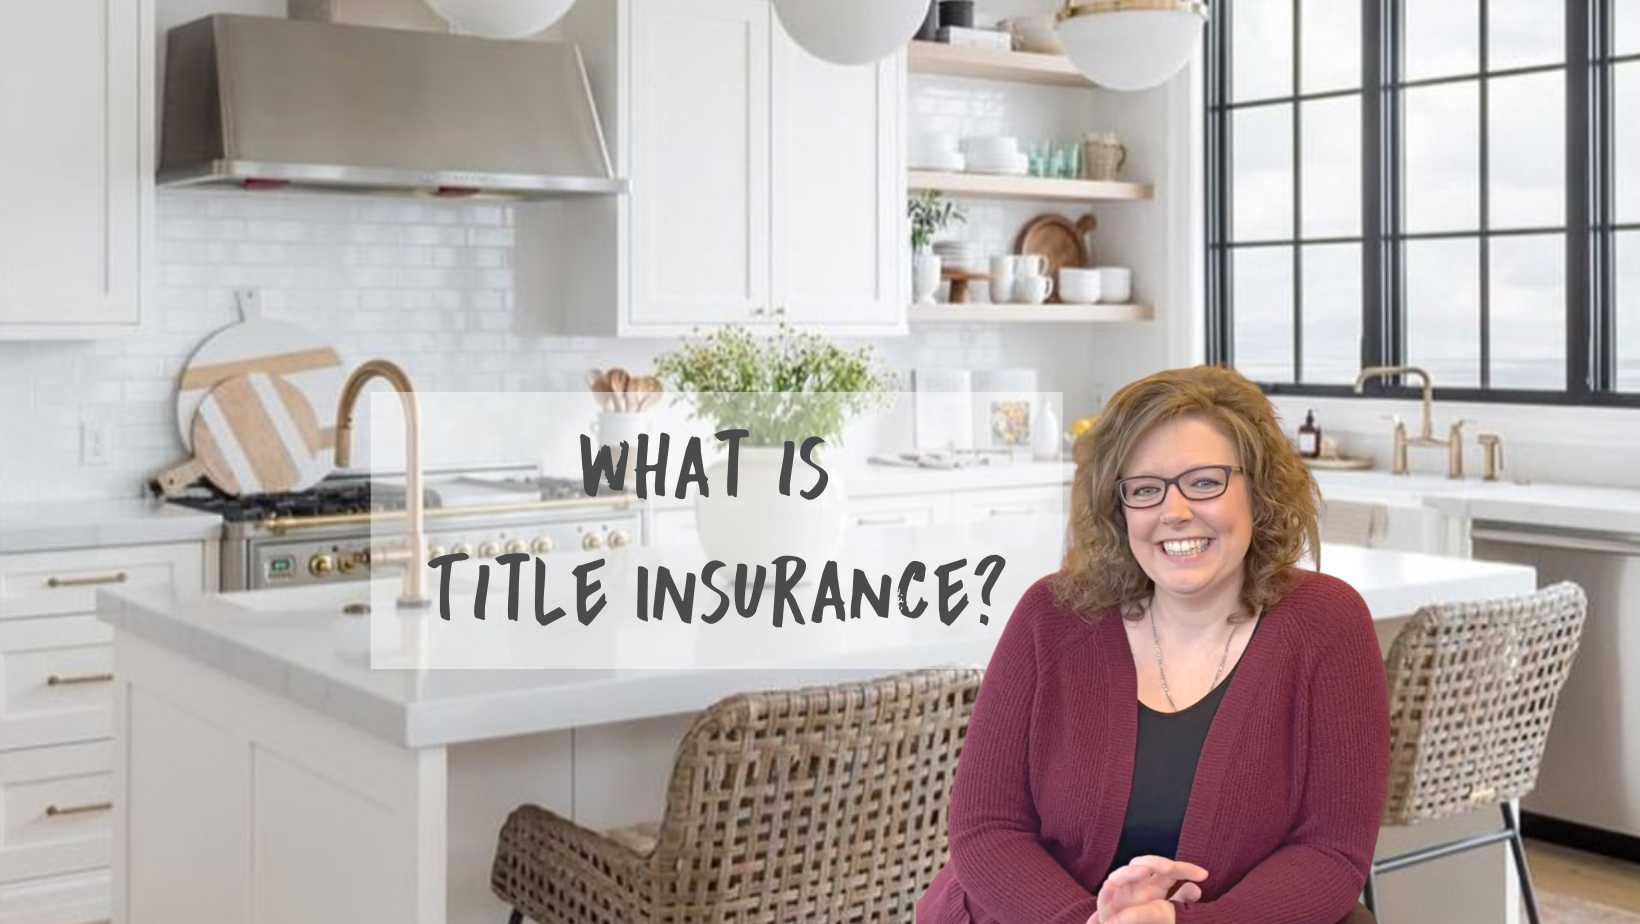 Video Tutorial with Val explaining Title Insurance